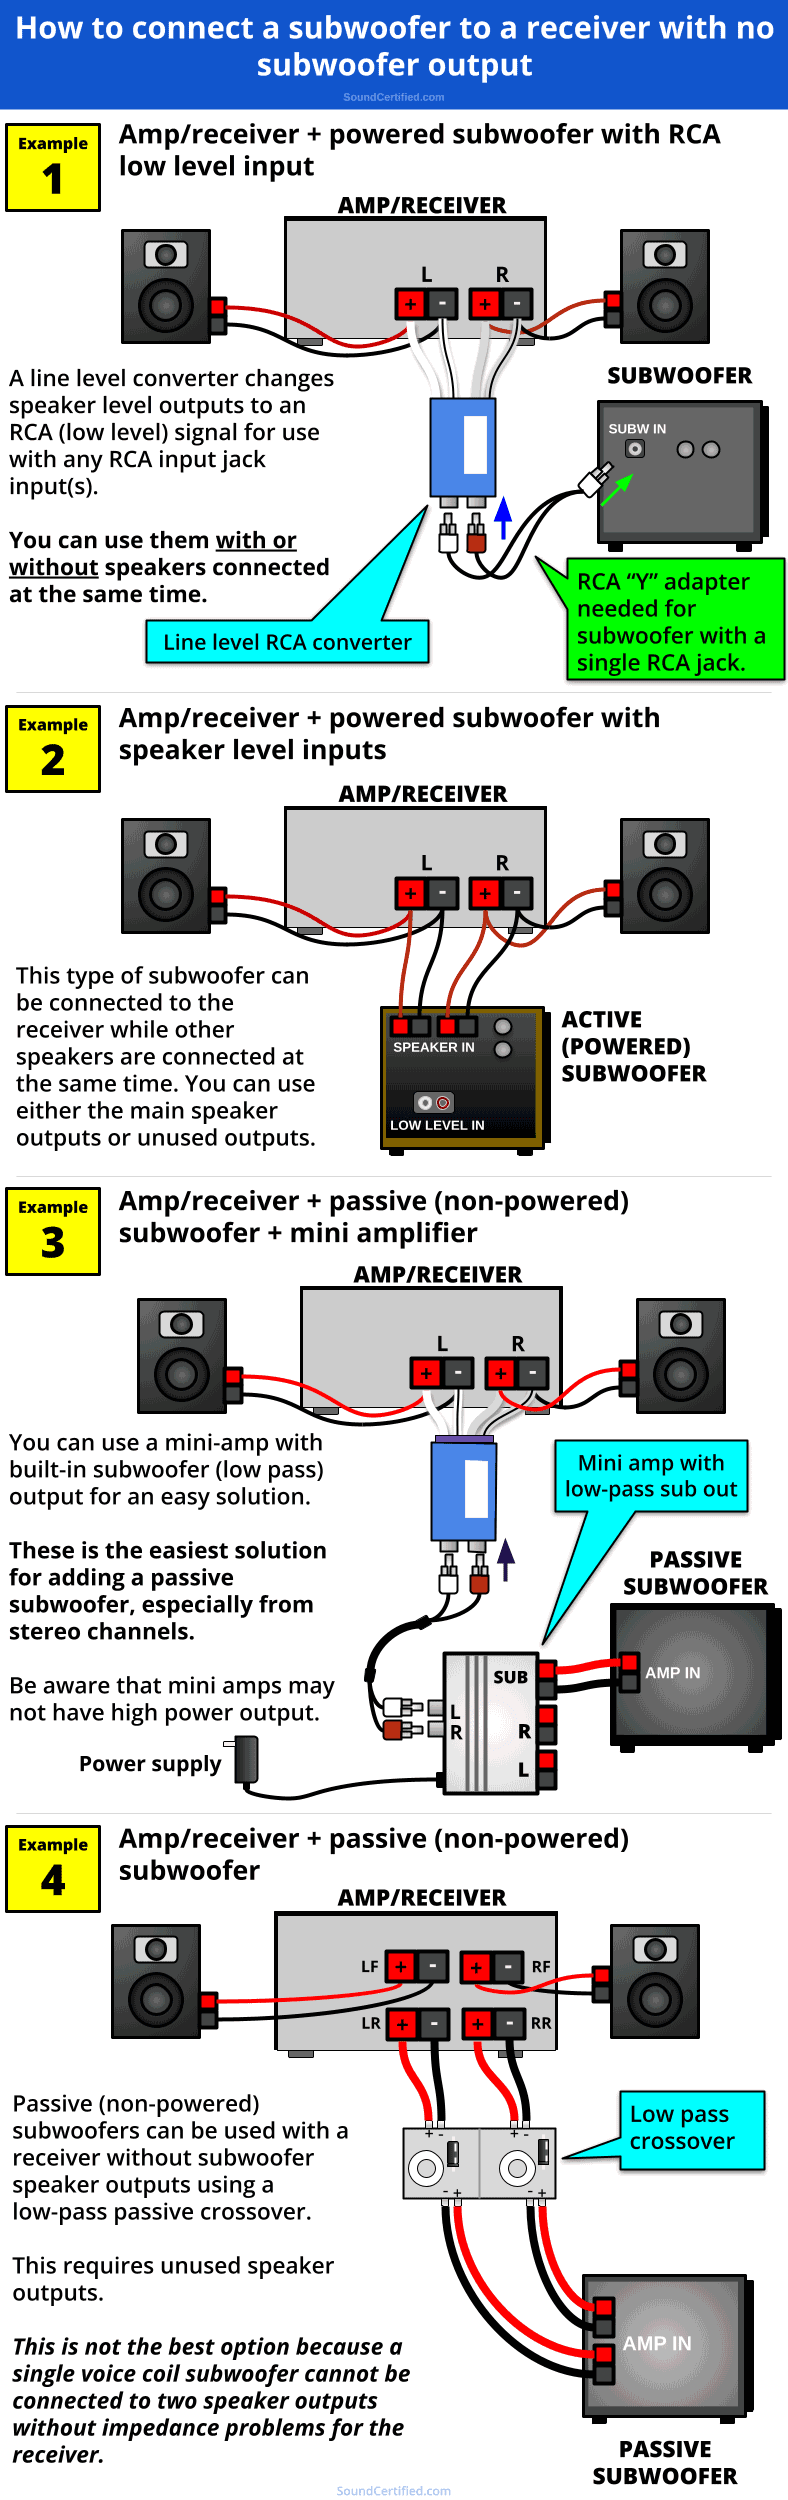 Diagram showing how to connect a subwoofer to receiver with no subwoofer output